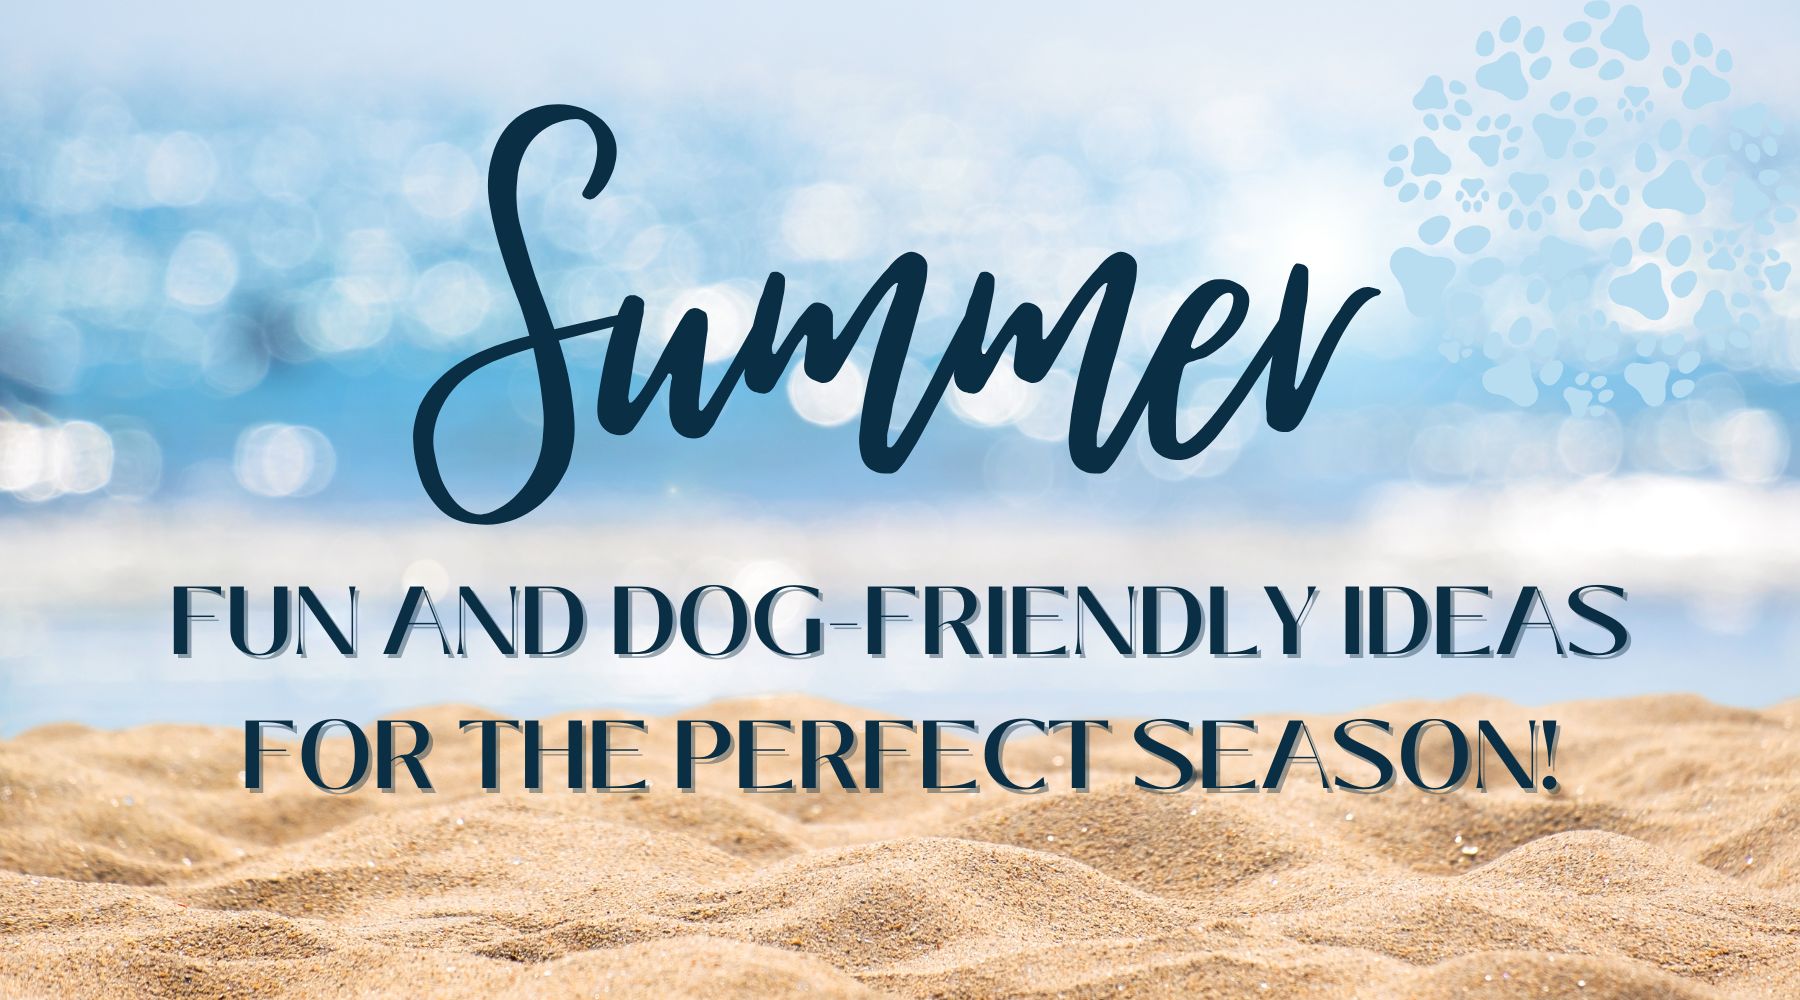 Tail-Wagging Summer: Fun and Dog-Friendly Ideas for the Perfect Season!